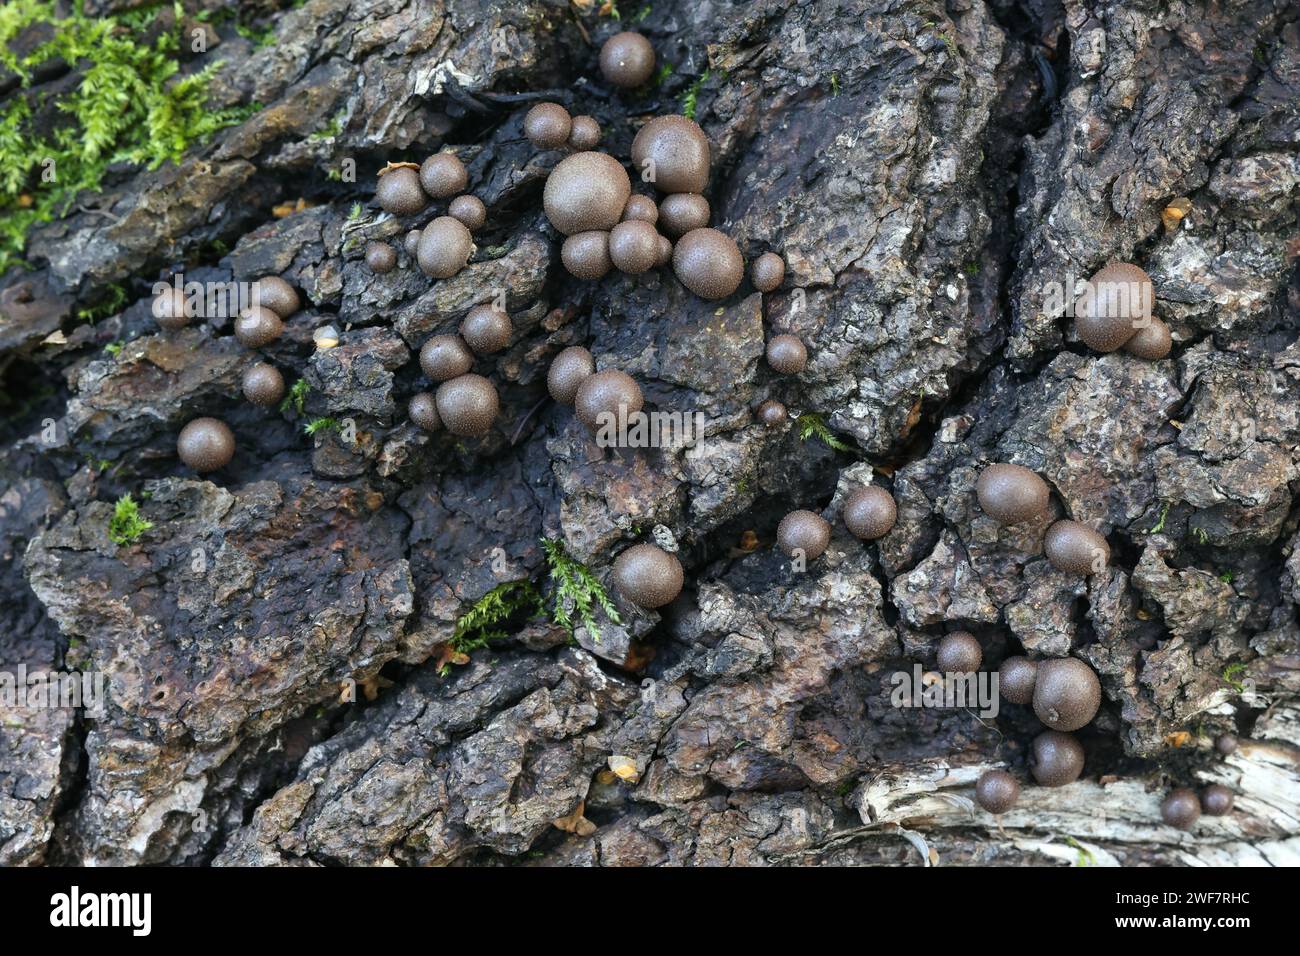 Lycogala epidendrum, commonly known as wolf's milk, groening's slime mold, aethalia or fruiting bodies on decaying wood Stock Photo